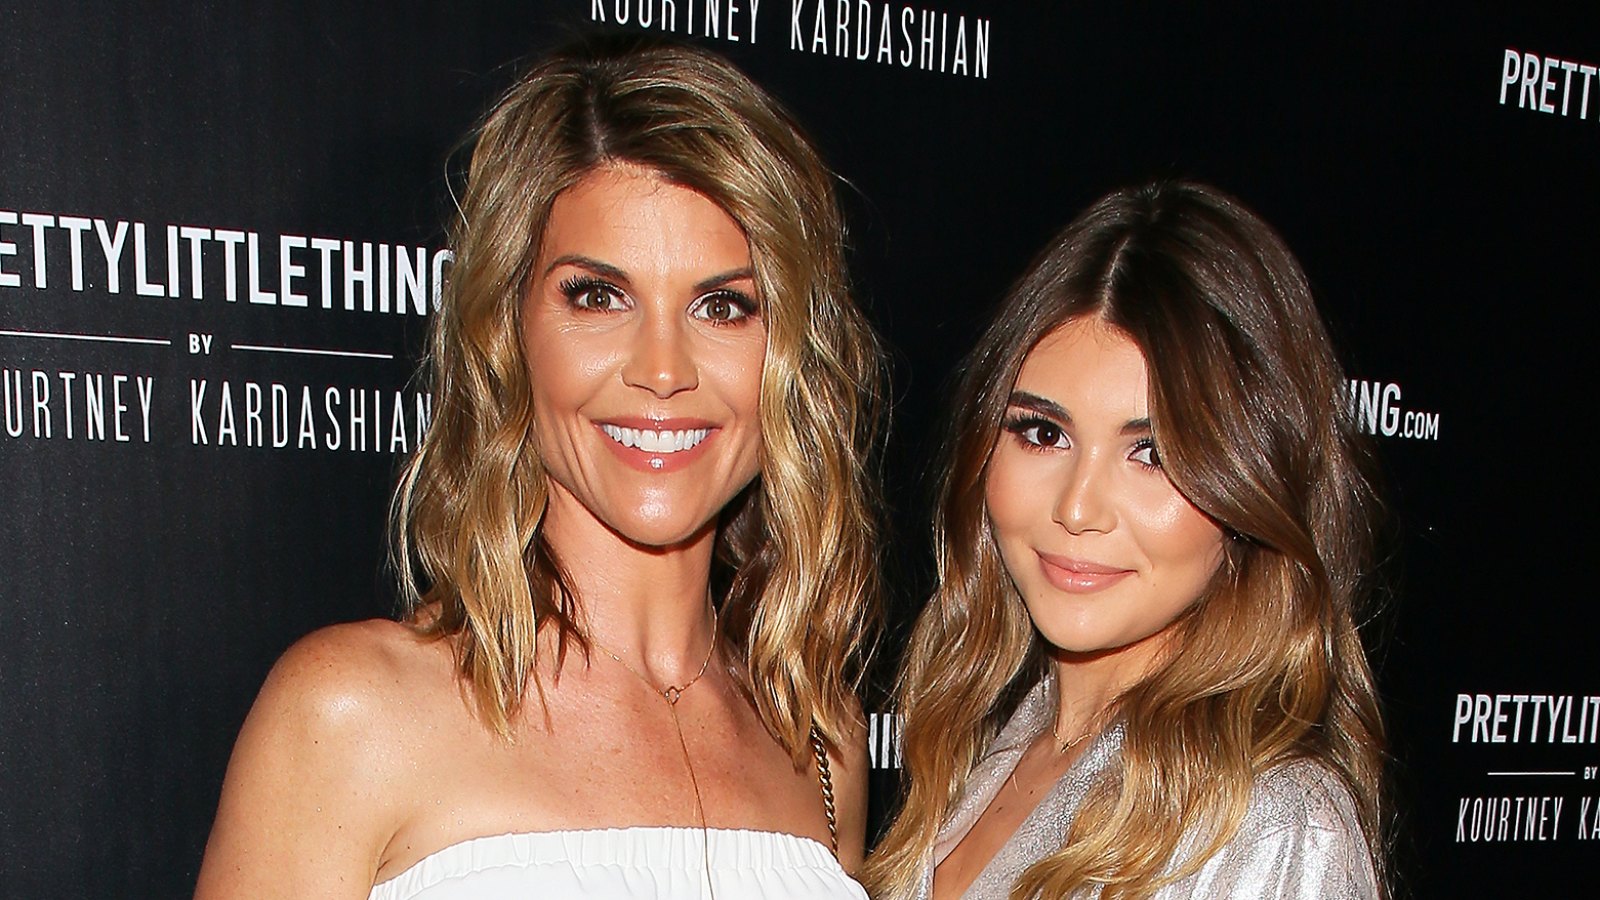 Lori Loughlin Daughter Olivia Jade Is 'Very Upset' With Parents Amid College Scam Feels Like She's the Victim